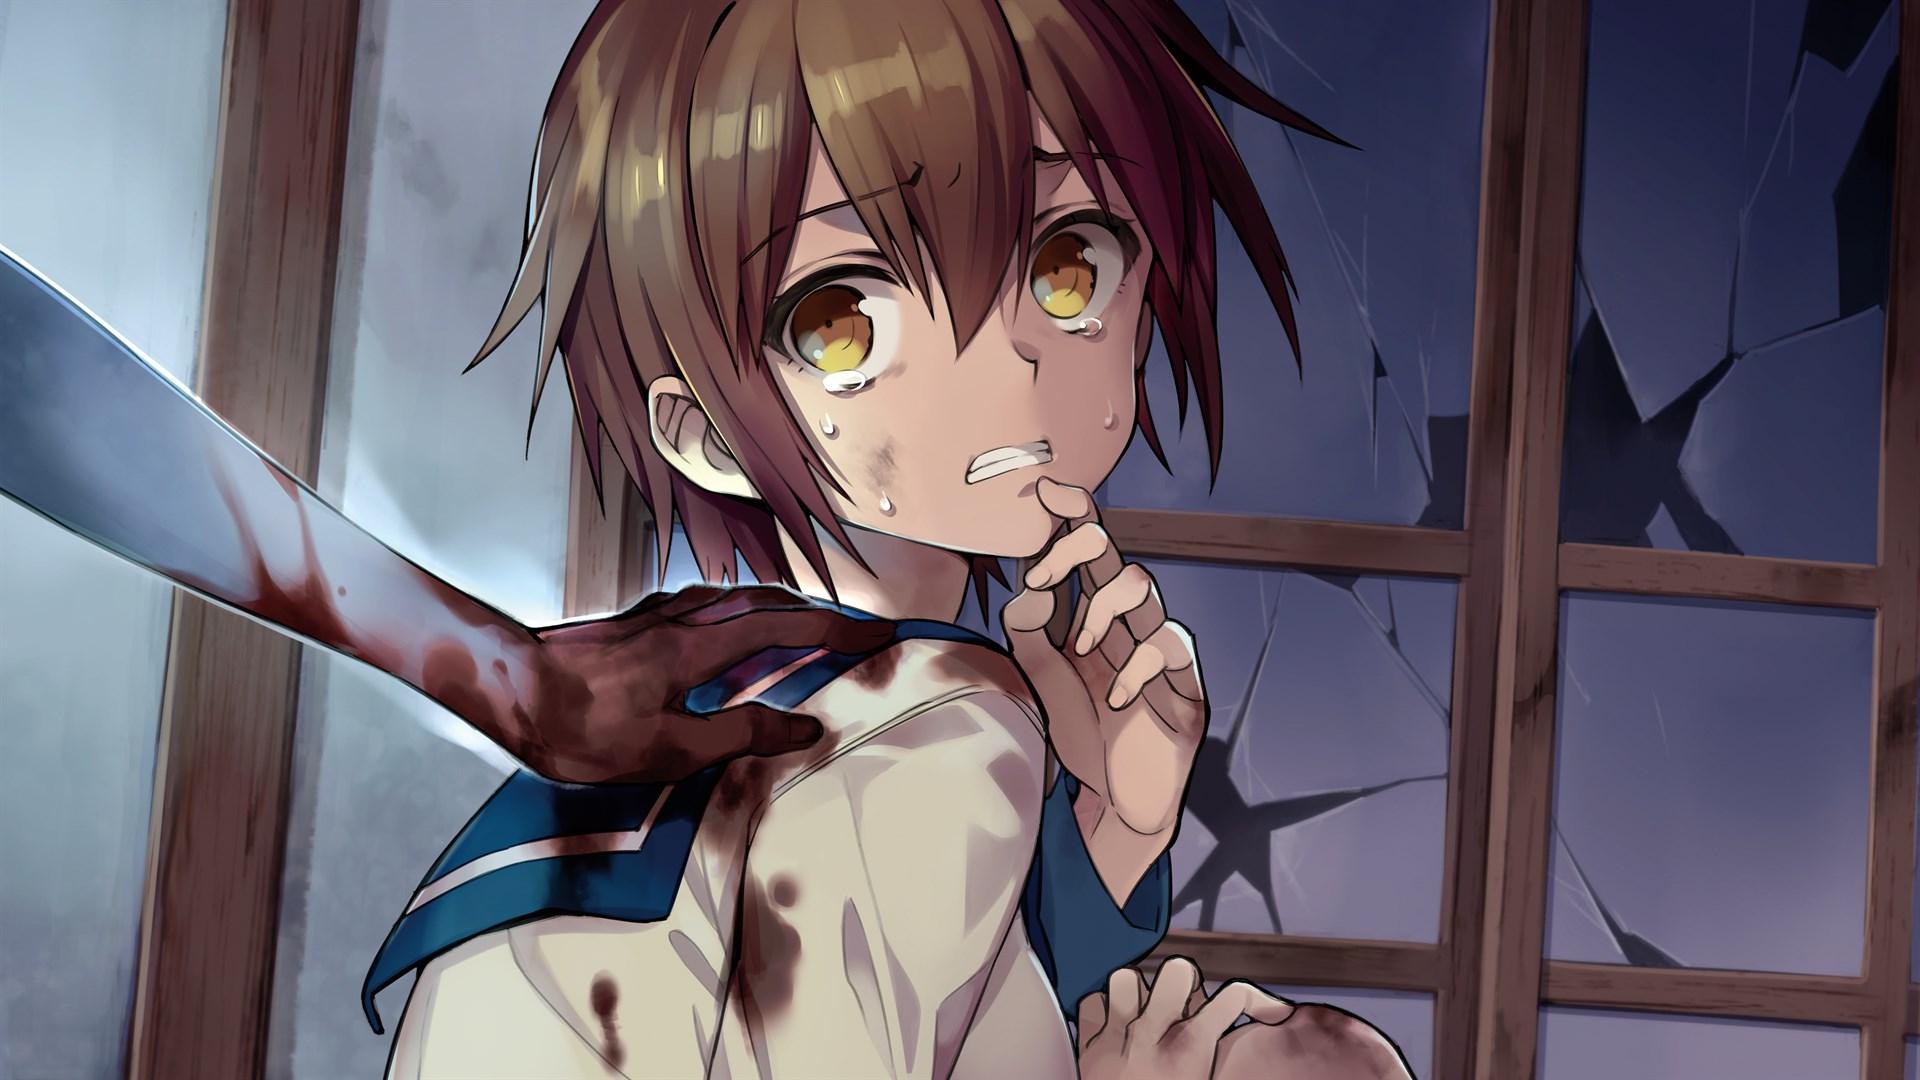 corpse party 2021